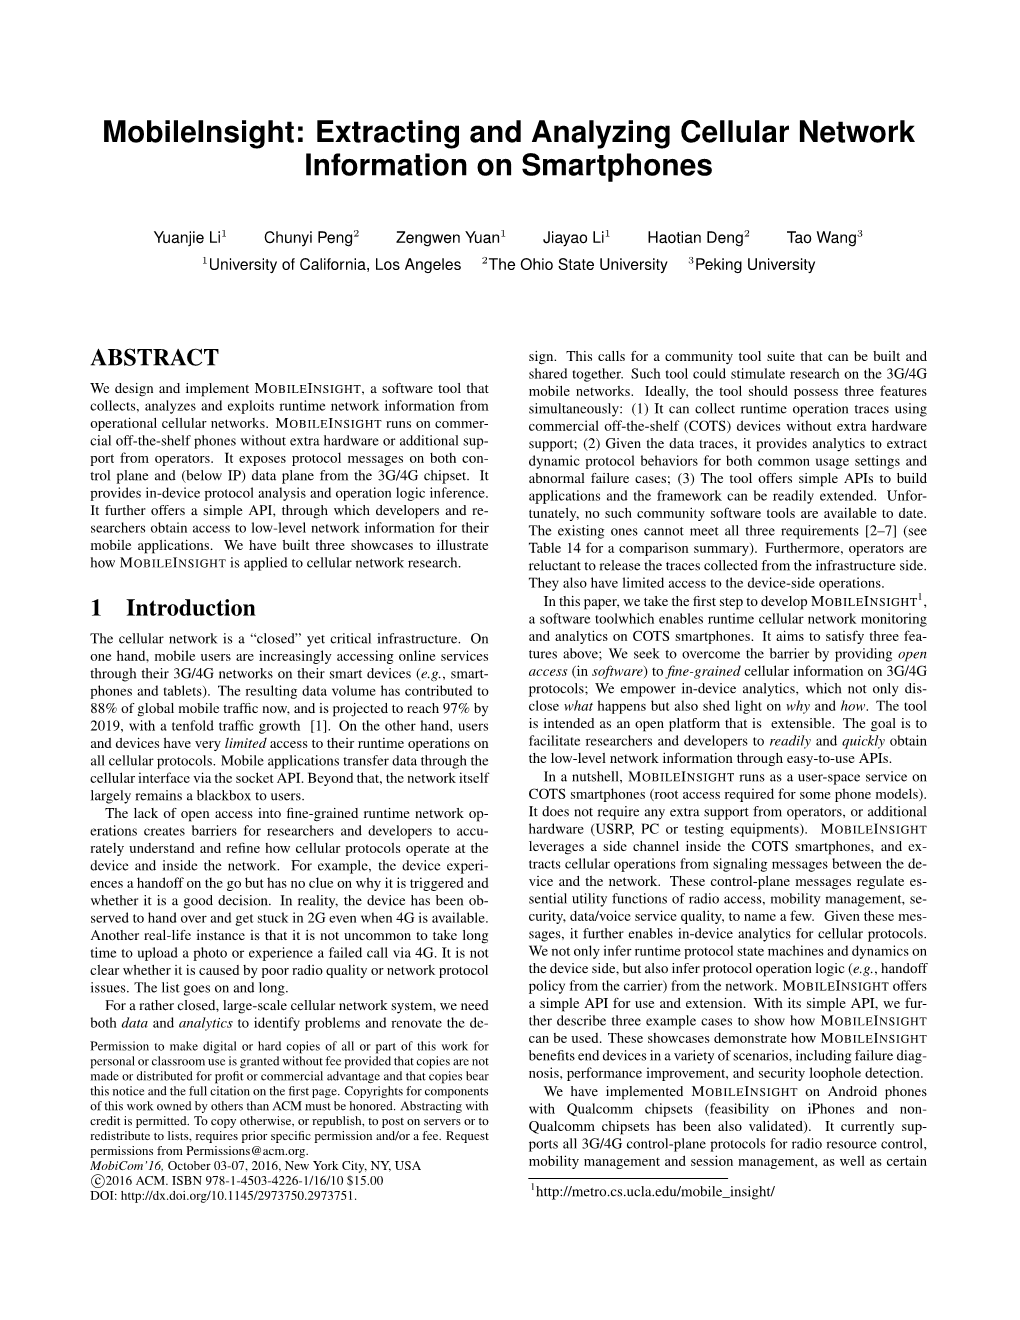 Mobileinsight: Extracting and Analyzing Cellular Network Information on Smartphones